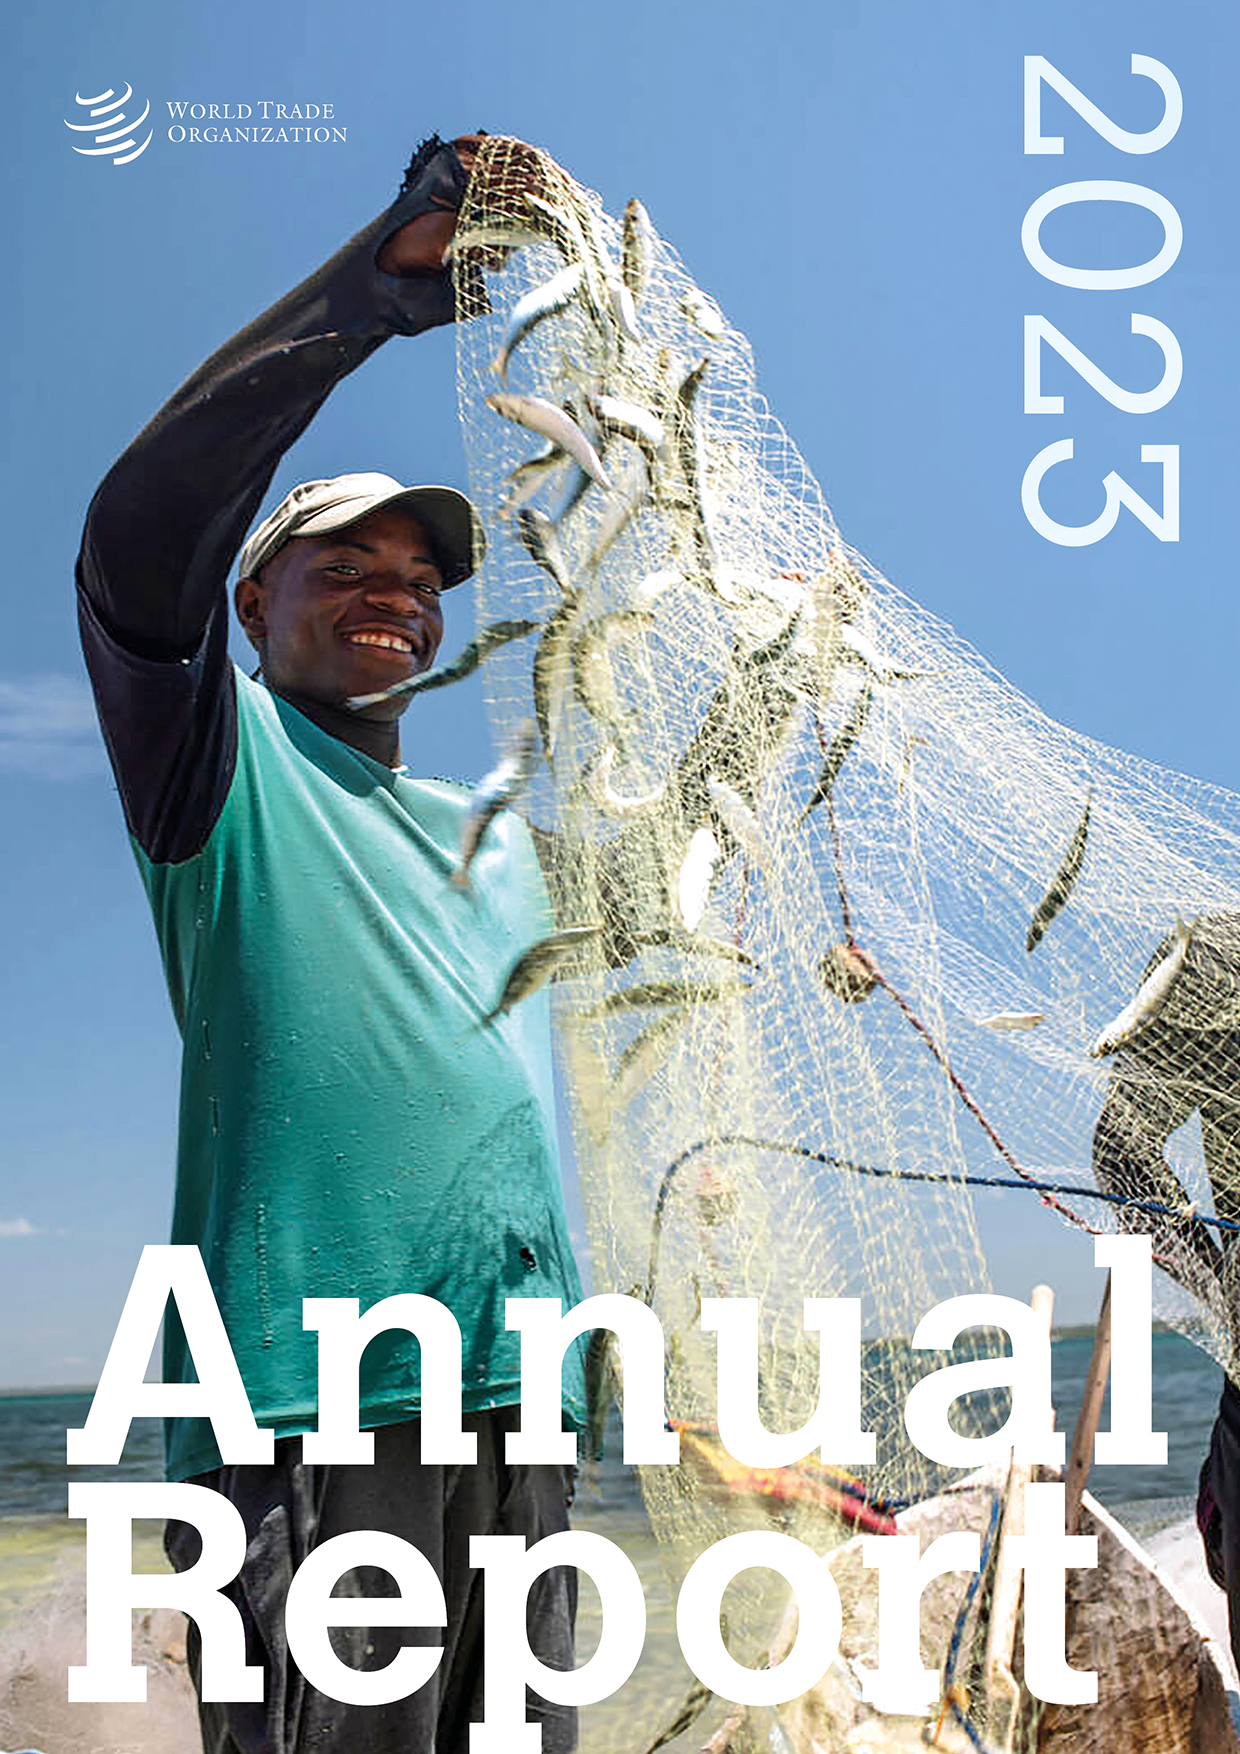 image of Annual Report 2023